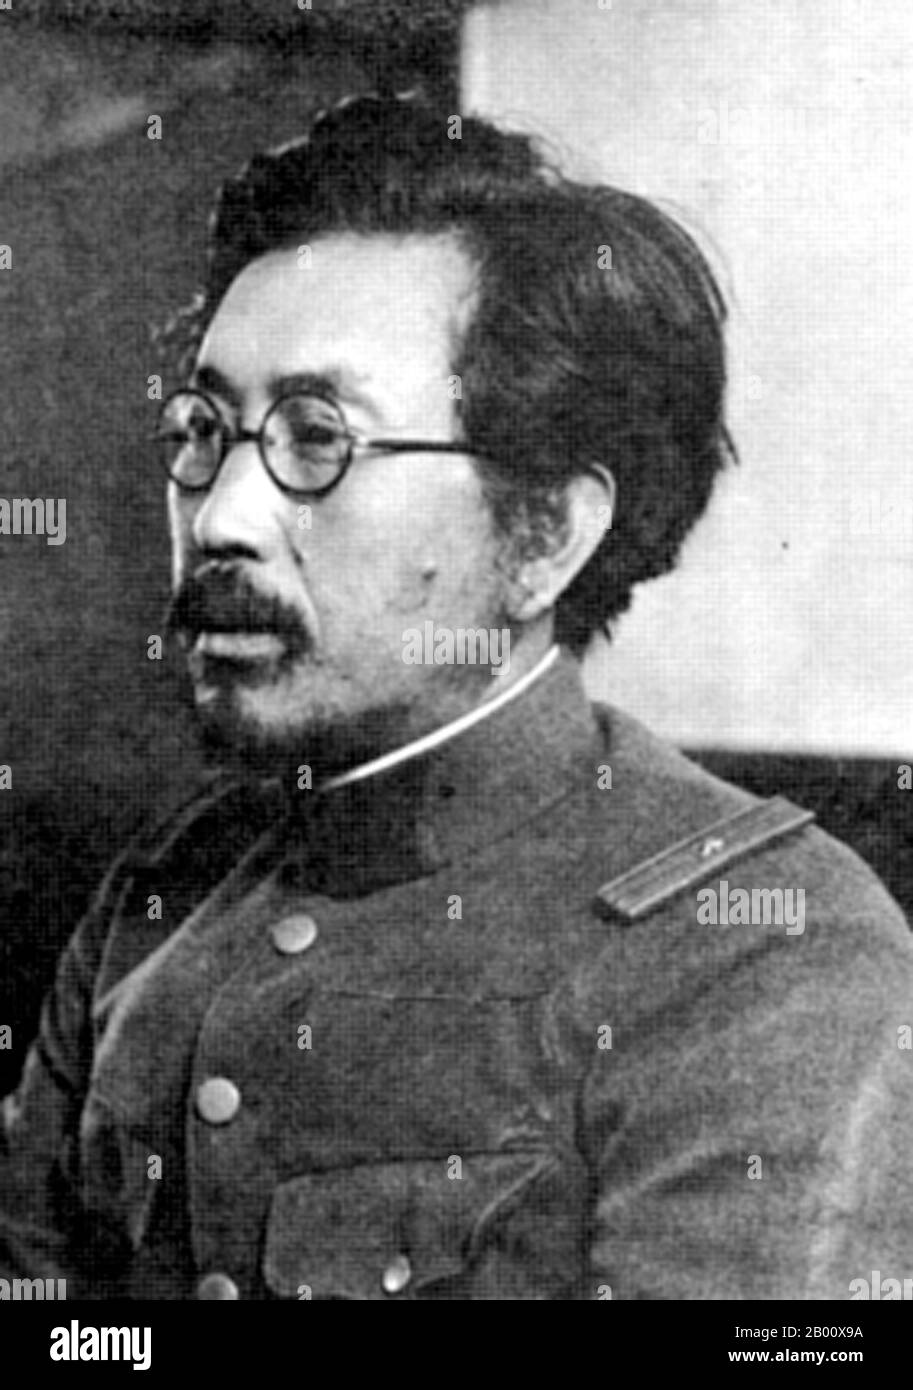 Japan: Shiro Ishii (1892 – 1959), a Japanese microbiologist and head of Unit 731 of the Imperial Japanese Army.  Unit 731 was a covert biological and chemical warfare research and development unit of the Imperial Japanese Army that undertook lethal human experimentation during the Second Sino-Japanese War (1937–1945) and World War II. It was responsible for some of the most notorious war crimes carried out by Japanese personnel. Unit 731 was the code name of an Imperial Japanese Army unit officially known as the Epidemic Prevention and Water Purification Department of the Kwantung Army. Stock Photo